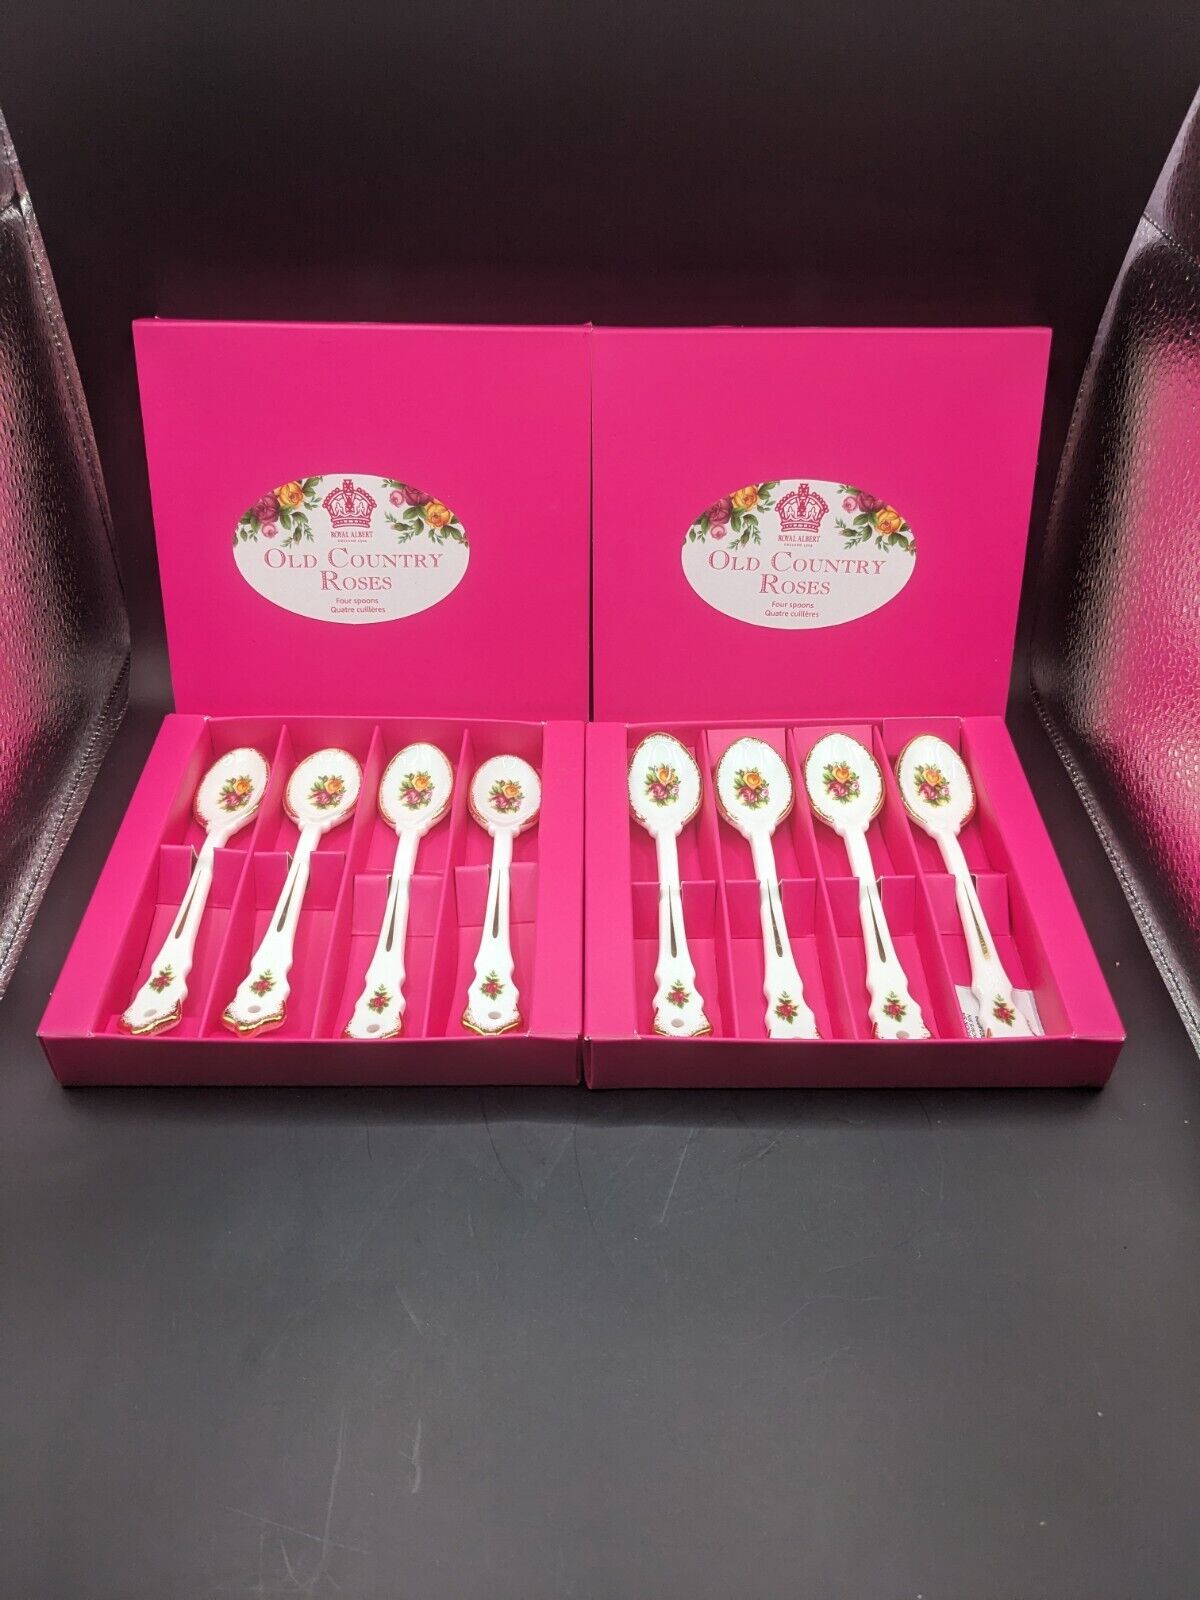 Royal Albert England Old Country Roses Fine Bone China Spoons New In Box Set of8